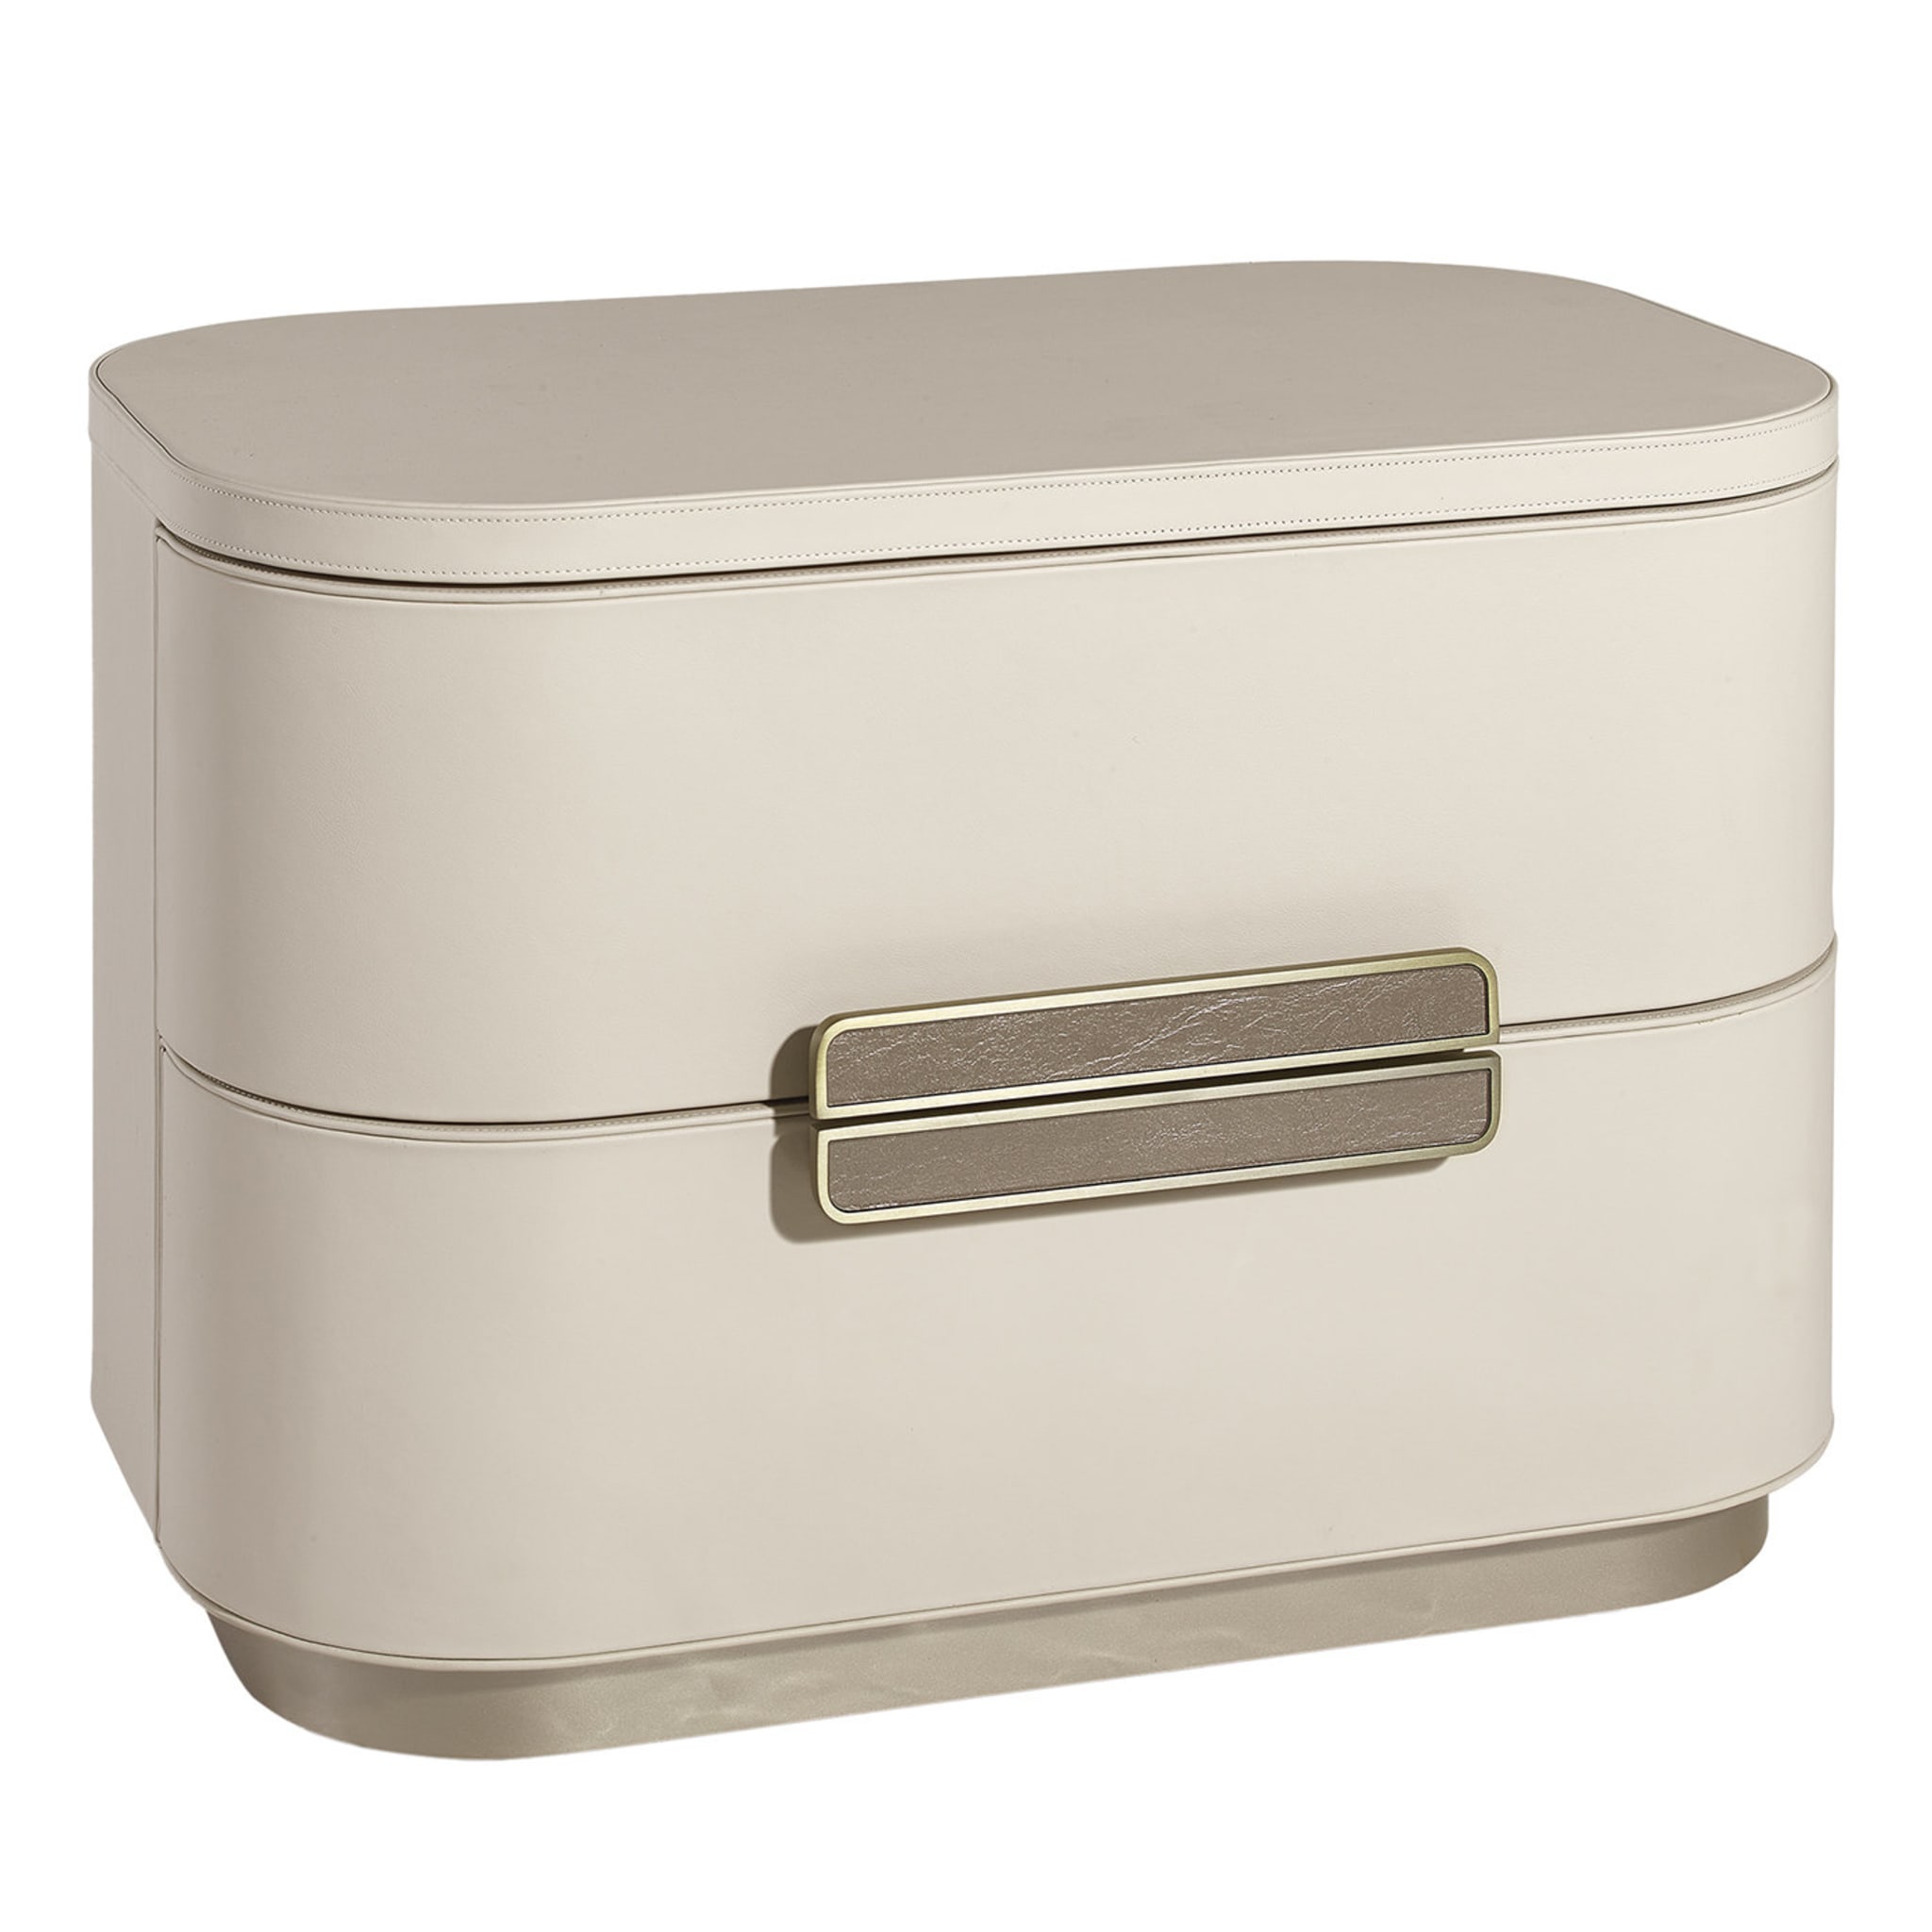 Amidele Beige Leather Nightstand - Main view